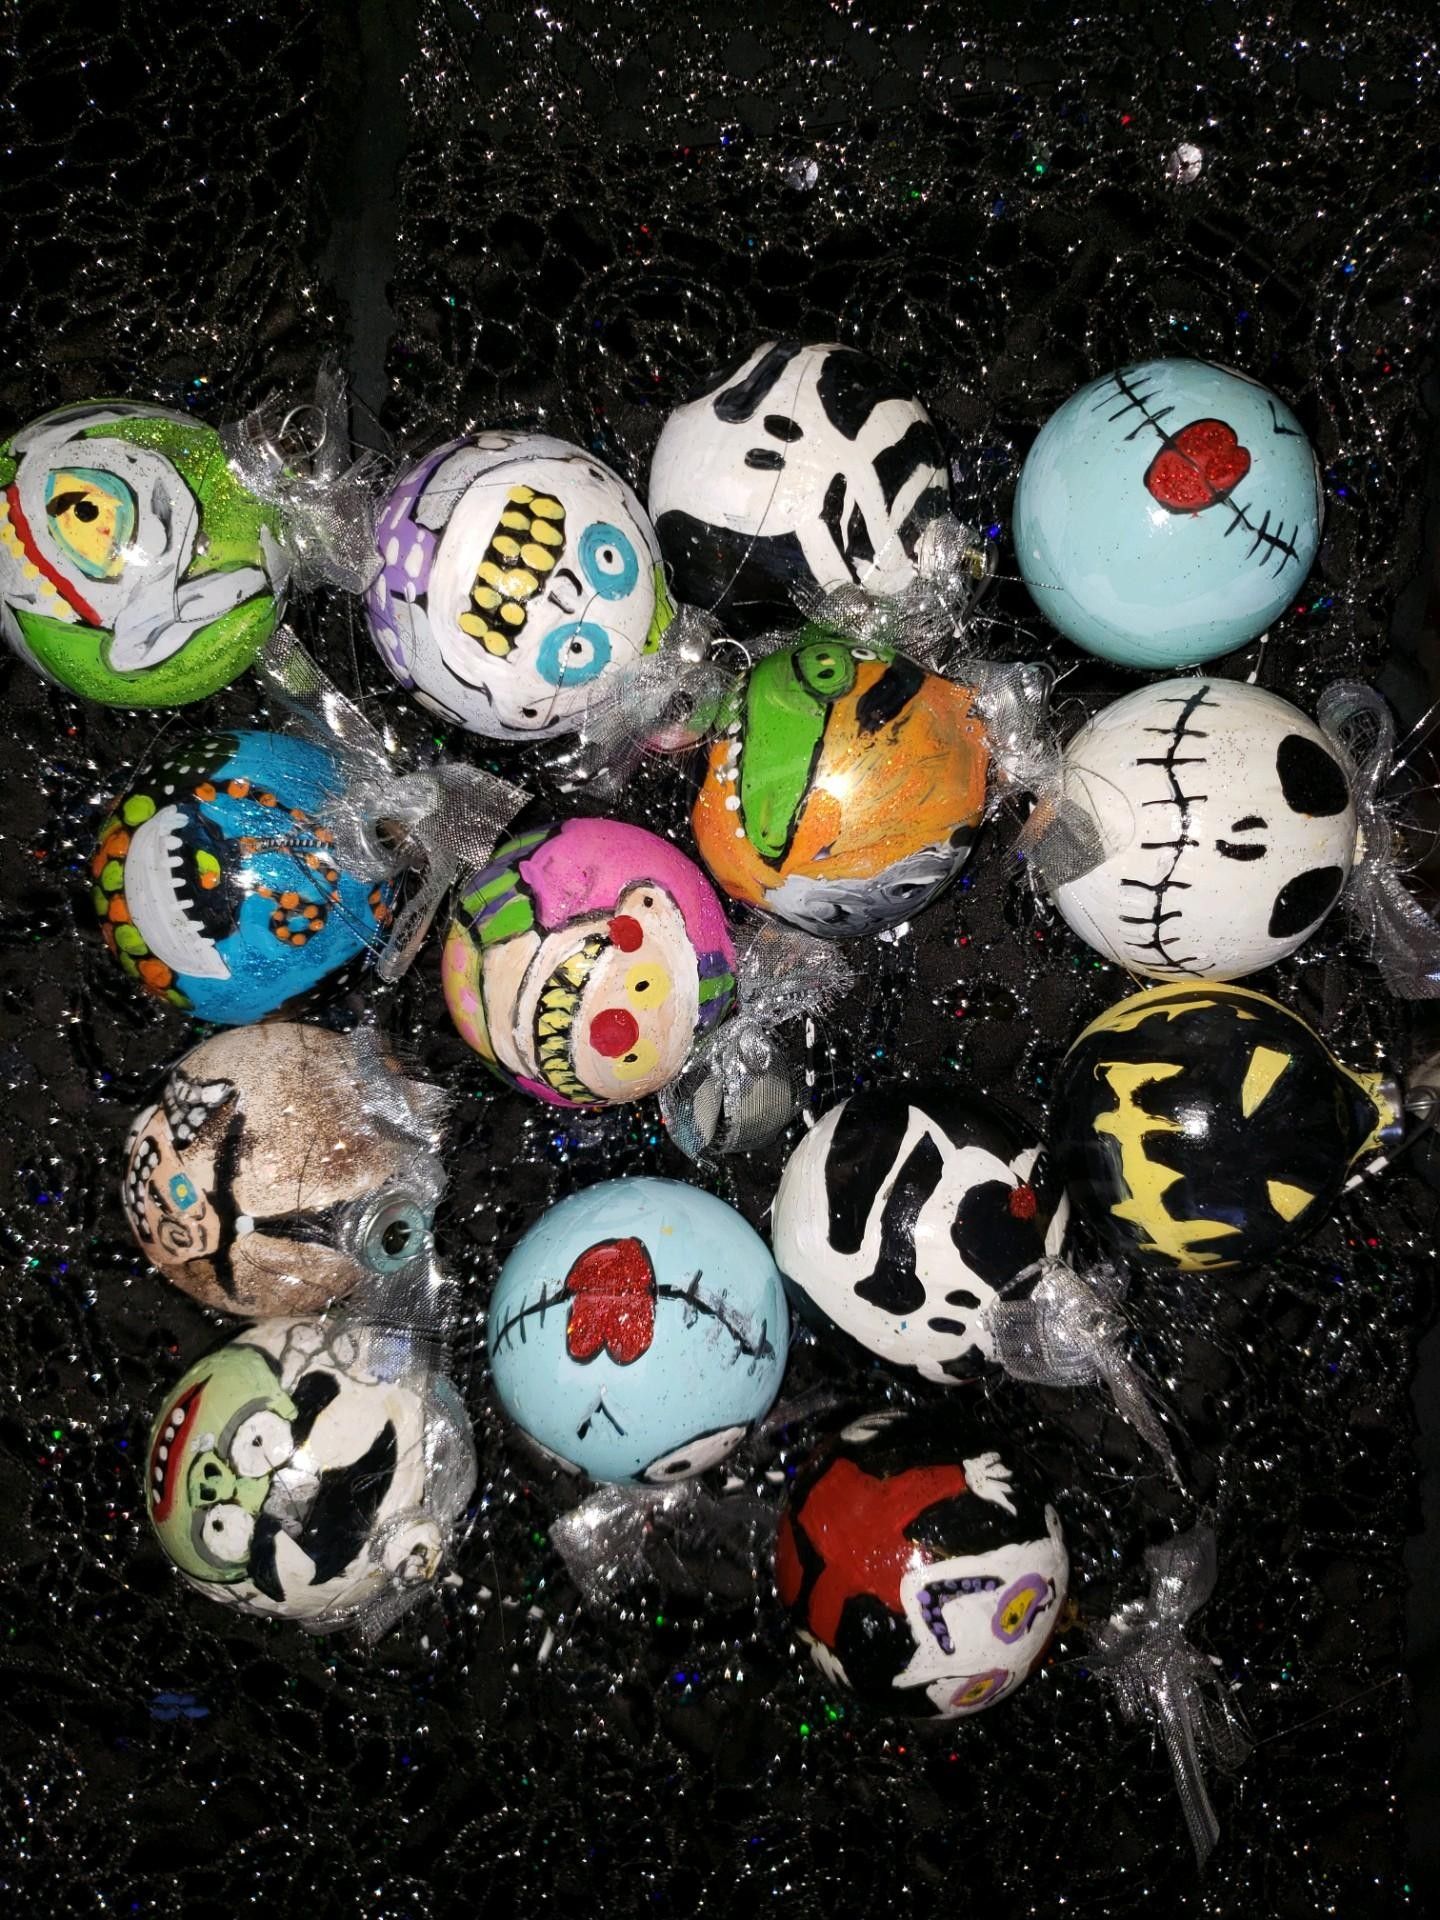 Nightmare Before Christmas ornaments